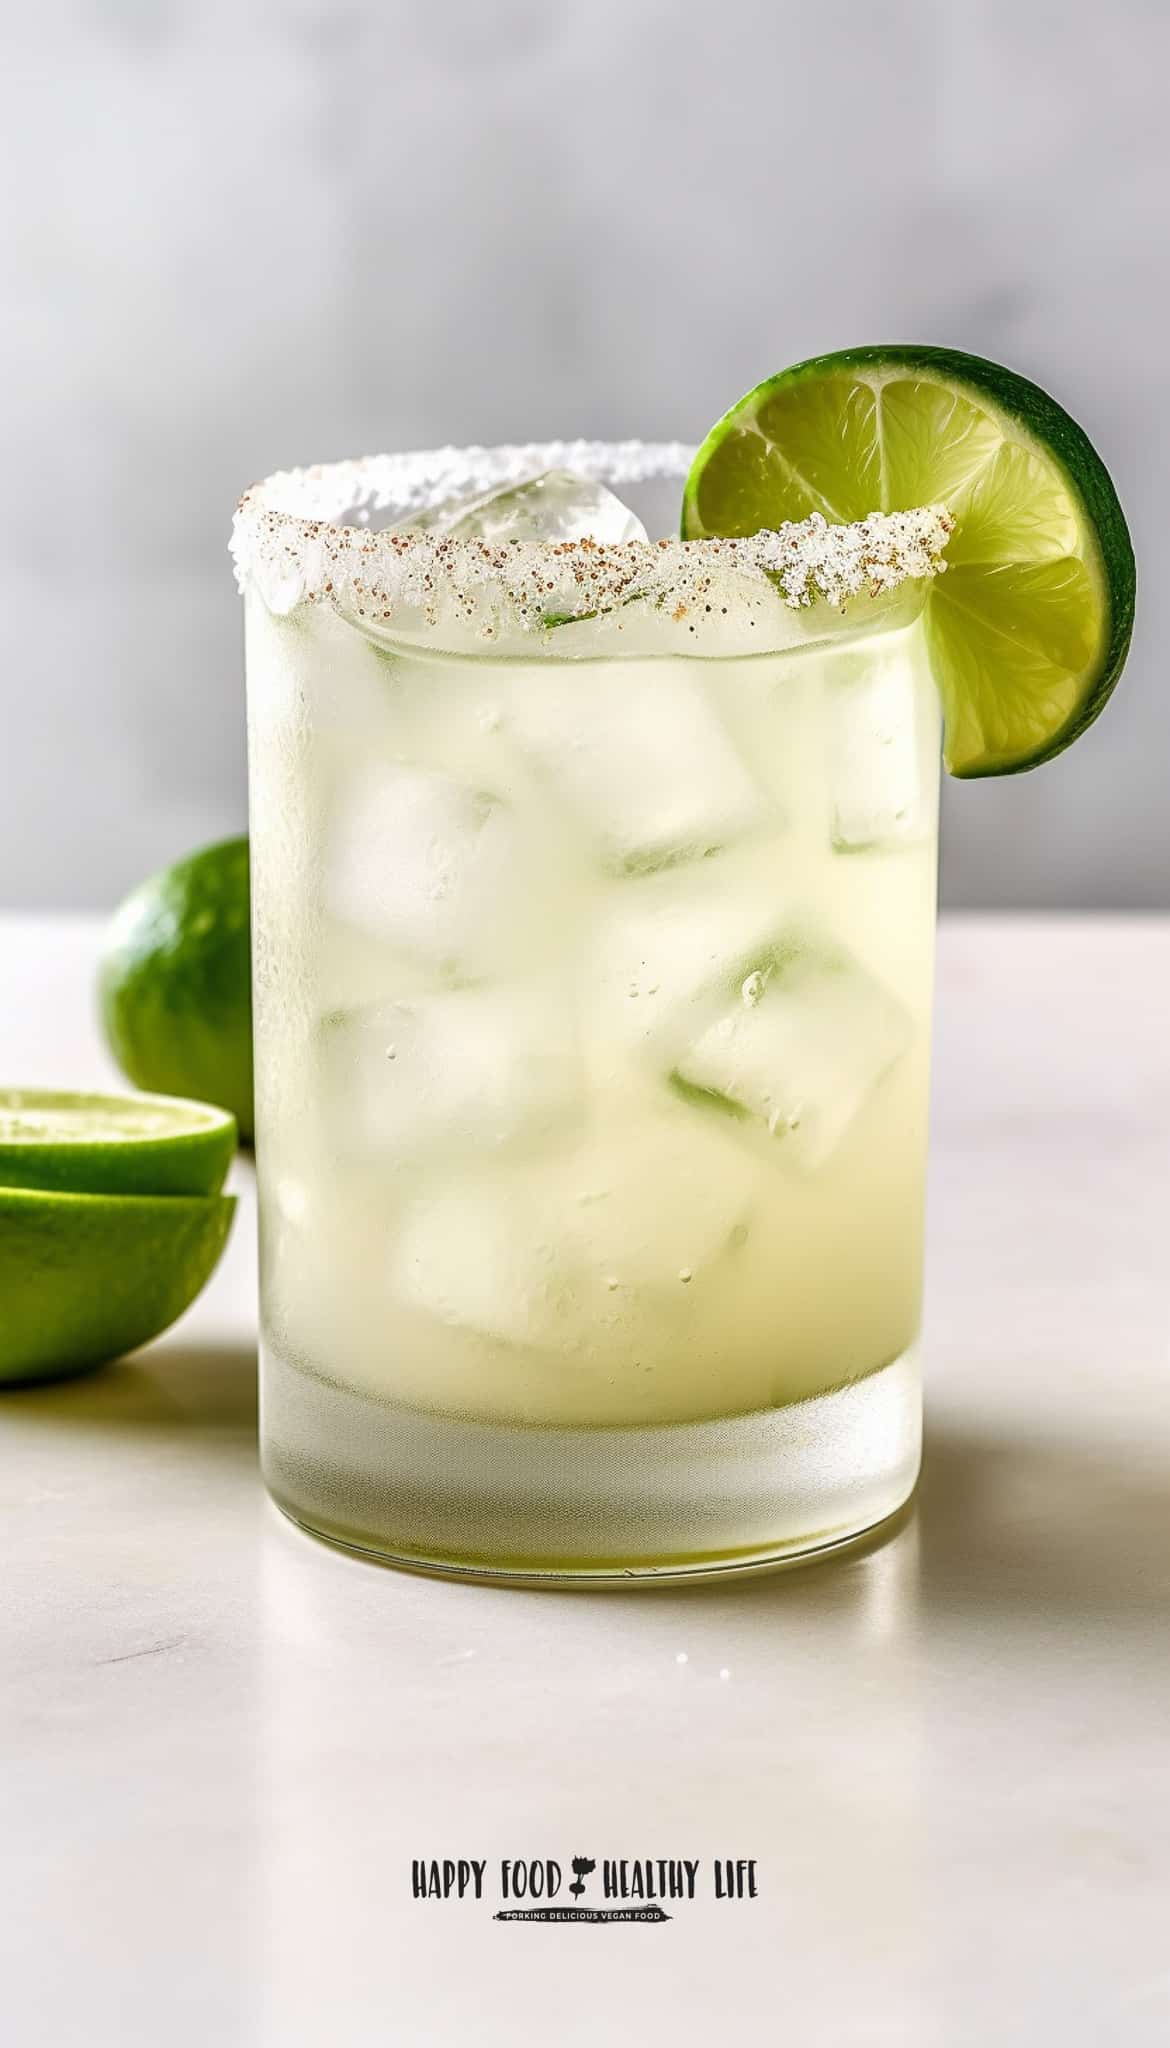 picture of a clear glass filled with an off white liquid and ice cubes, salt and brown on rim with a lime wheel on the rim. Cut limes to the side. appears to be a margarita